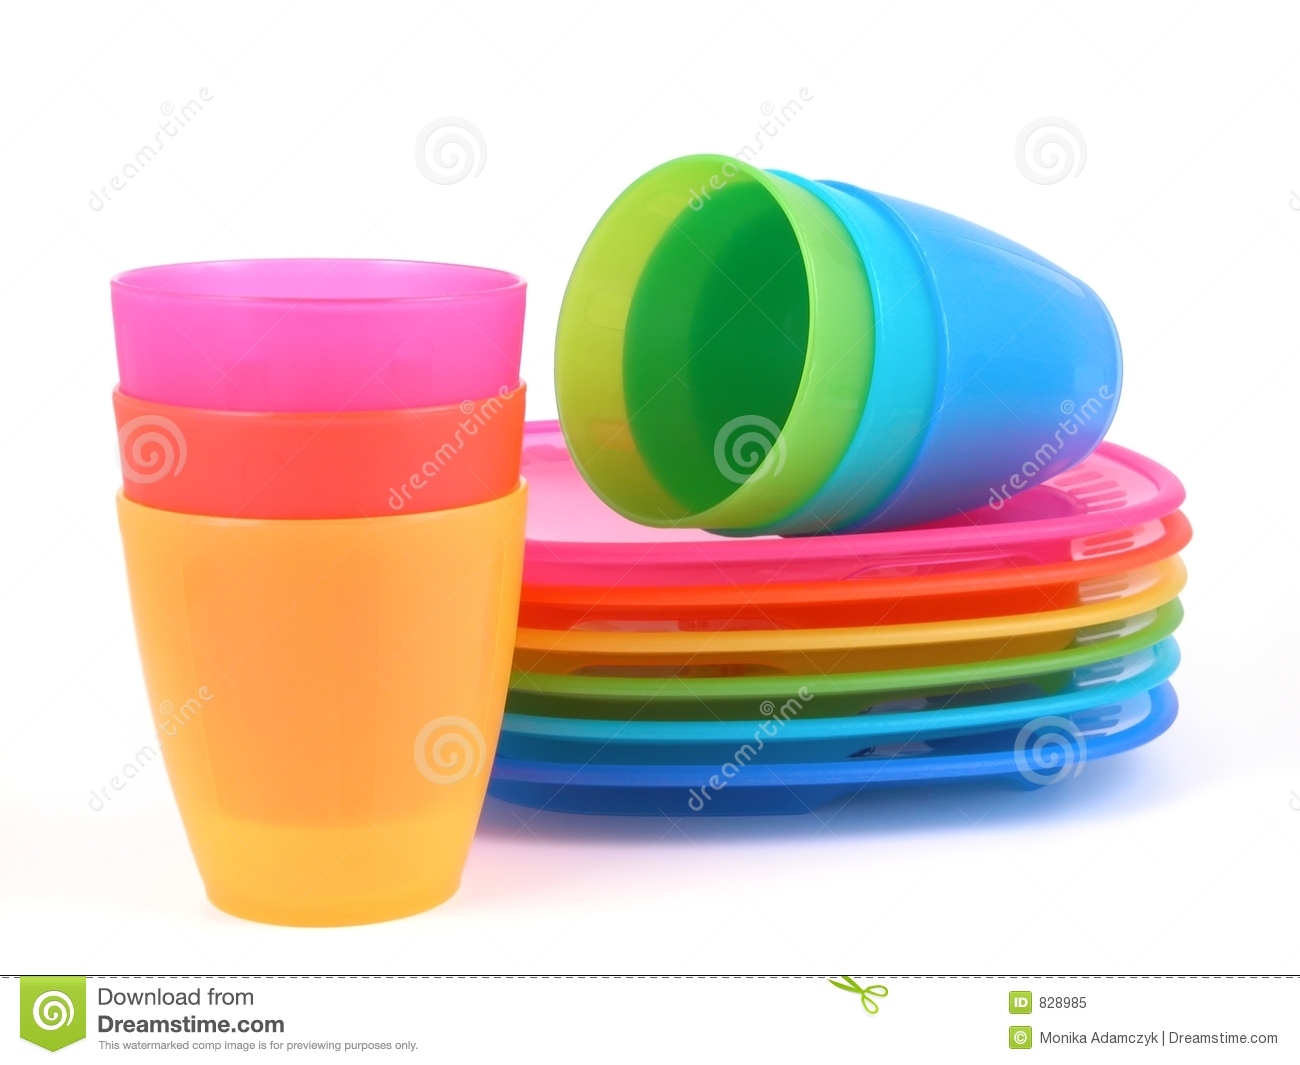 Plastic Cups And Plates Royalty Free Stock Photo   Image  828985